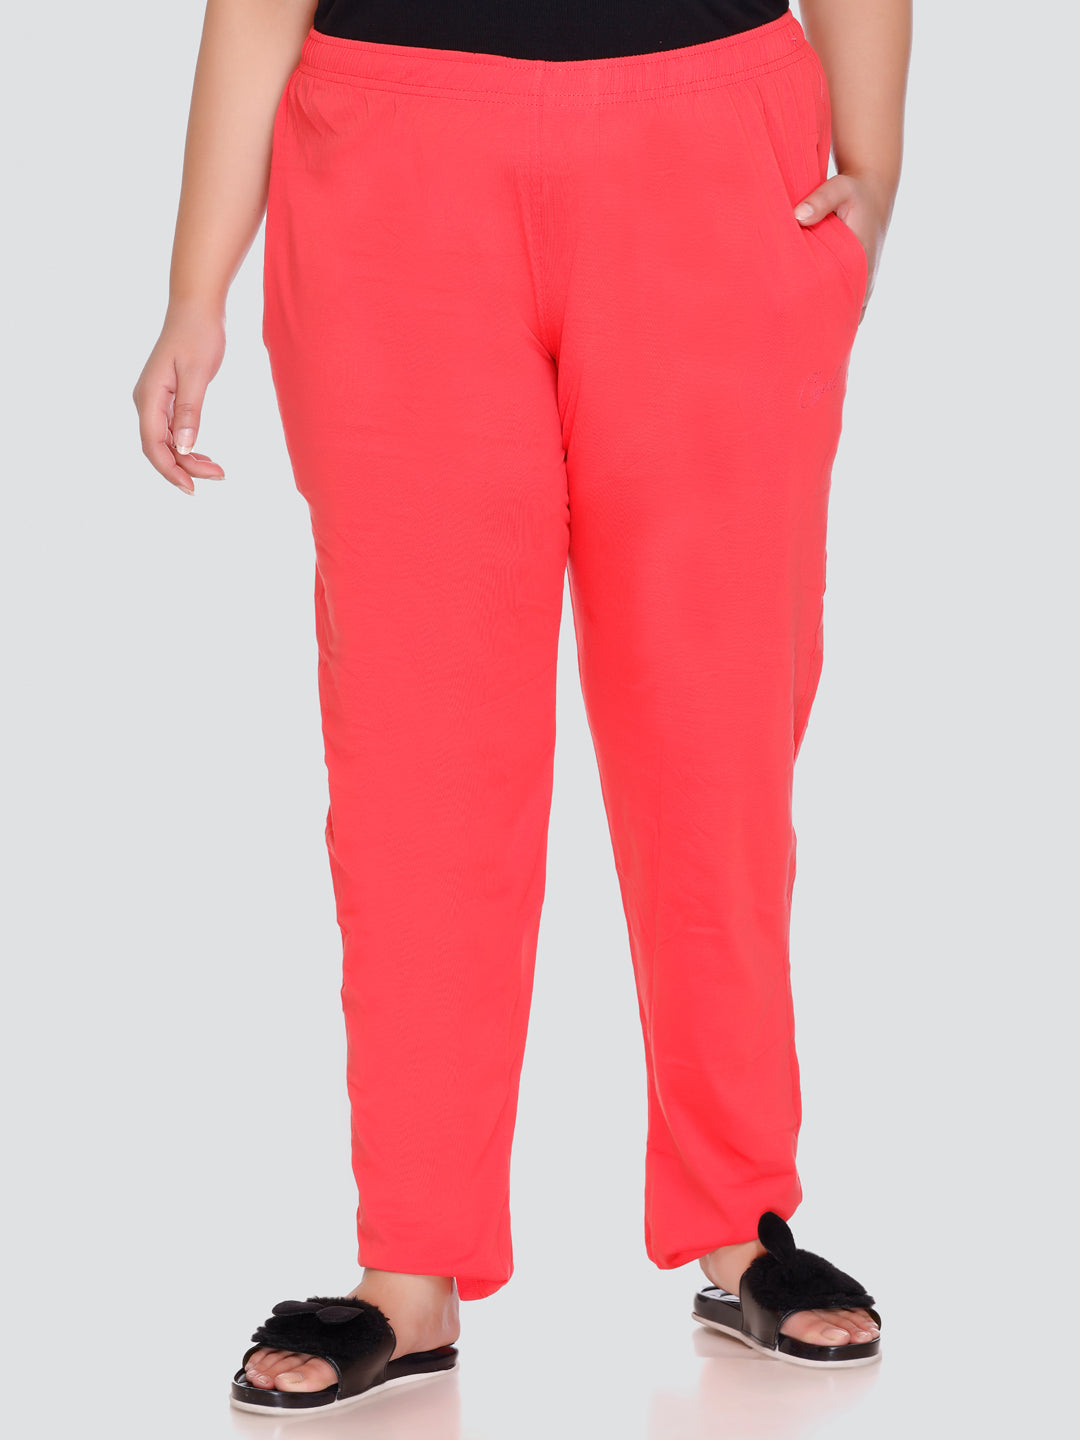 Soft Coral Red Cotton Track Pants For Women At Best Prices